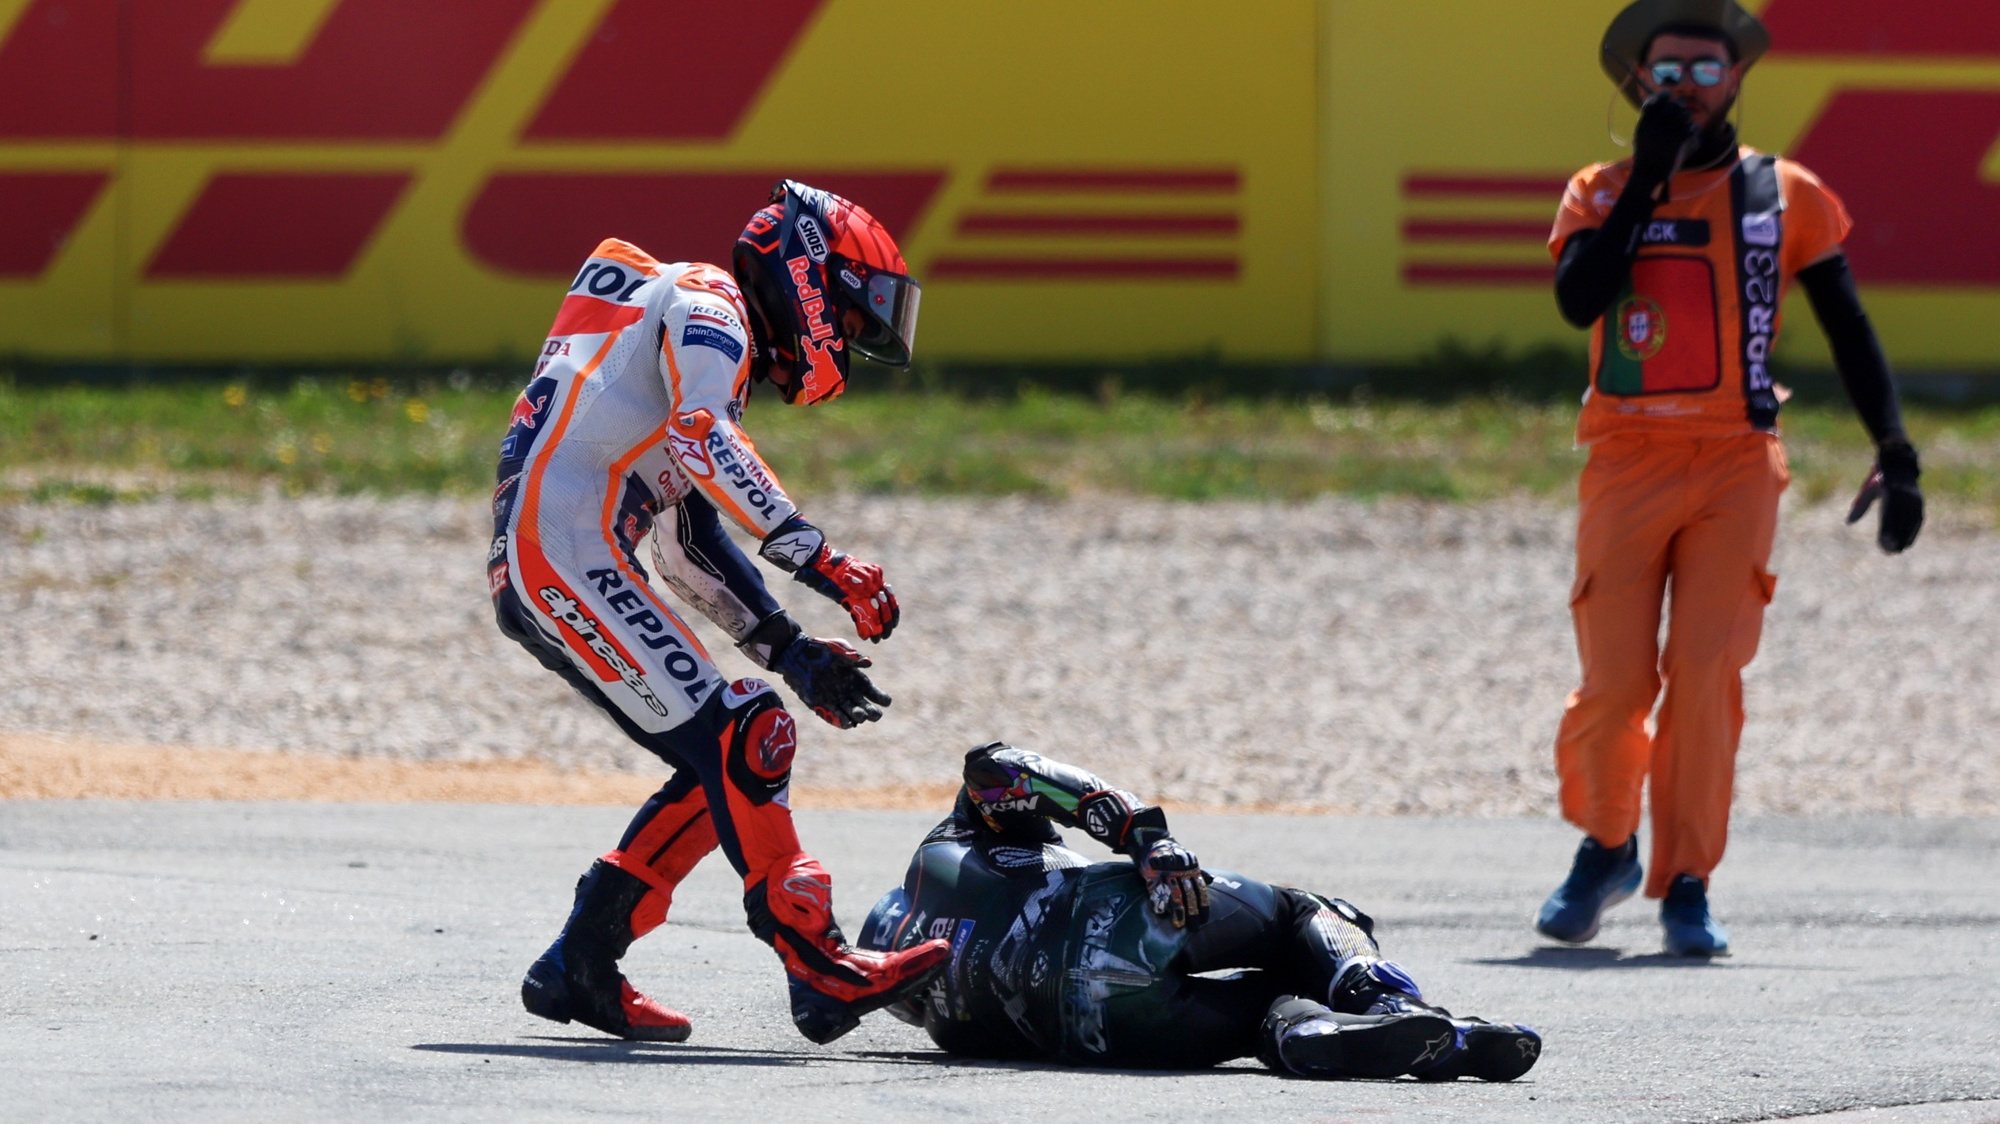 Spanish MotoGP rider Marc Marquez (L) of Repsol Honda Team tries to help Portuguese MotoGP rider Miguel Oliveira of CryptoDATA RNF MotoGP Team after a crash during the MotoGP race at the Motorcycling Grand Prix of Portugal at Algarve International race track, Portimao, south of Portugal, 26 March 2023. NUNO VEIGA/LUSA